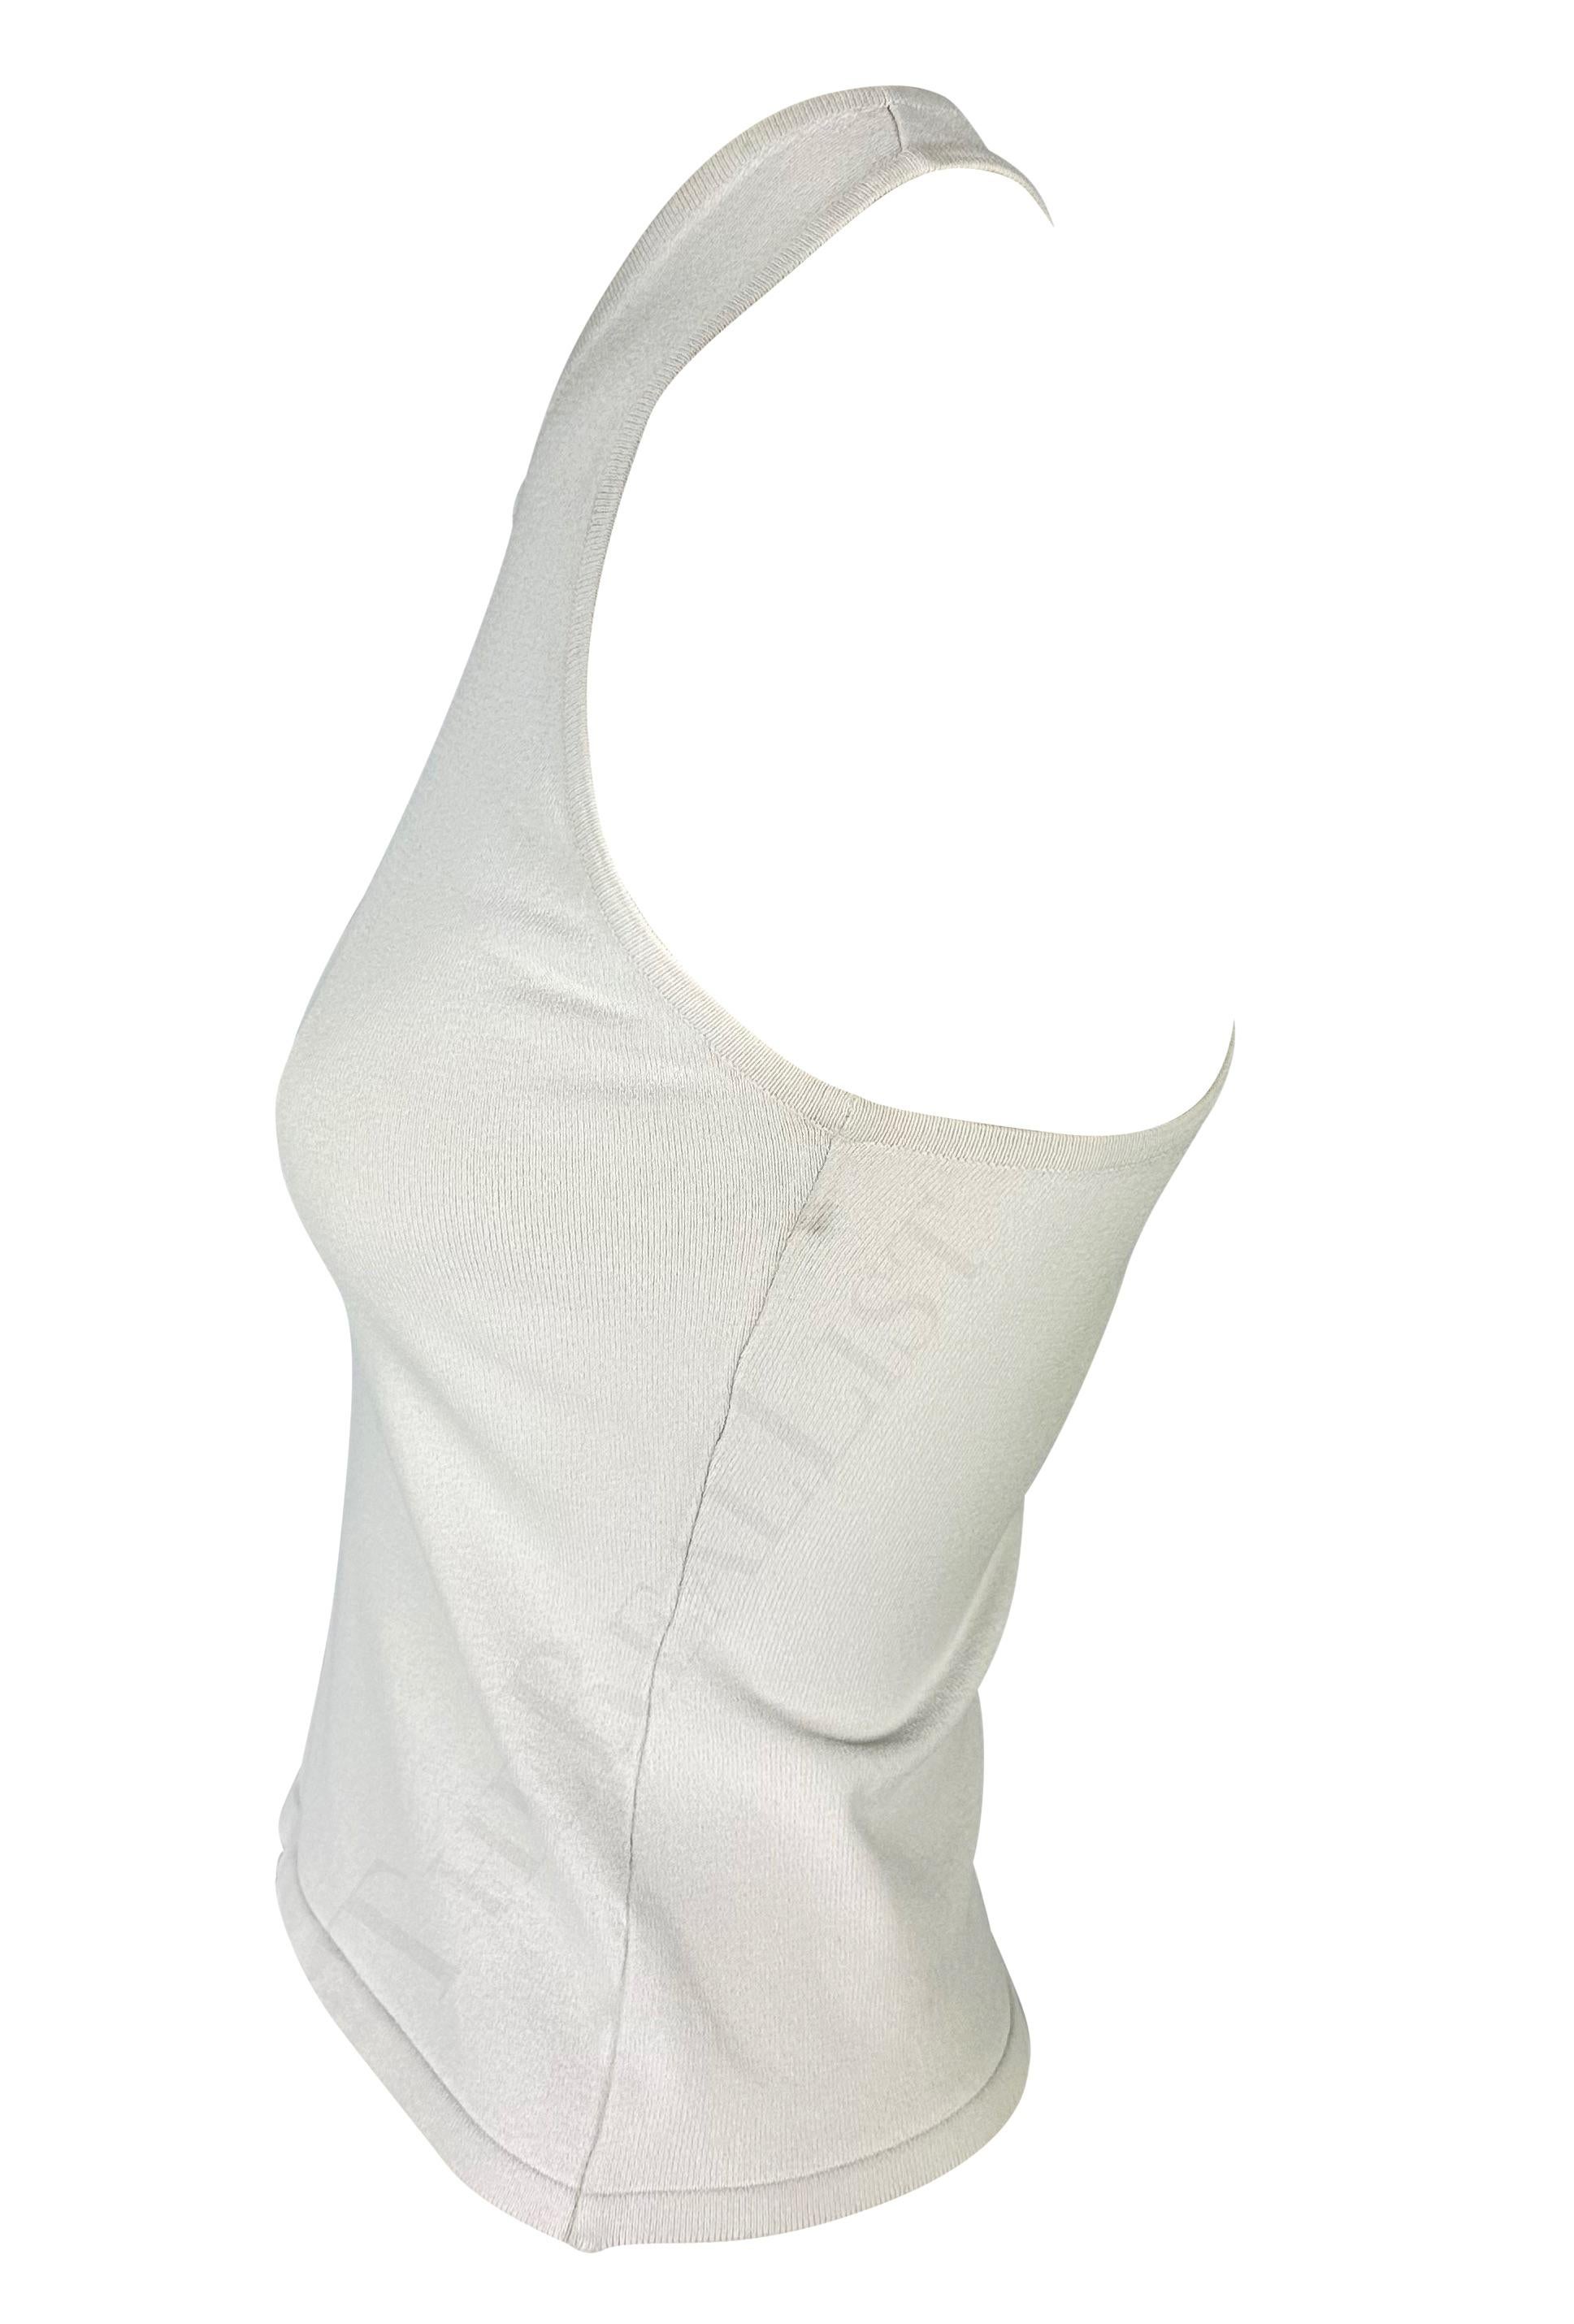 S/S 1998 Gucci by Tom Ford White Stretch Knit Racerback Tank Top 2